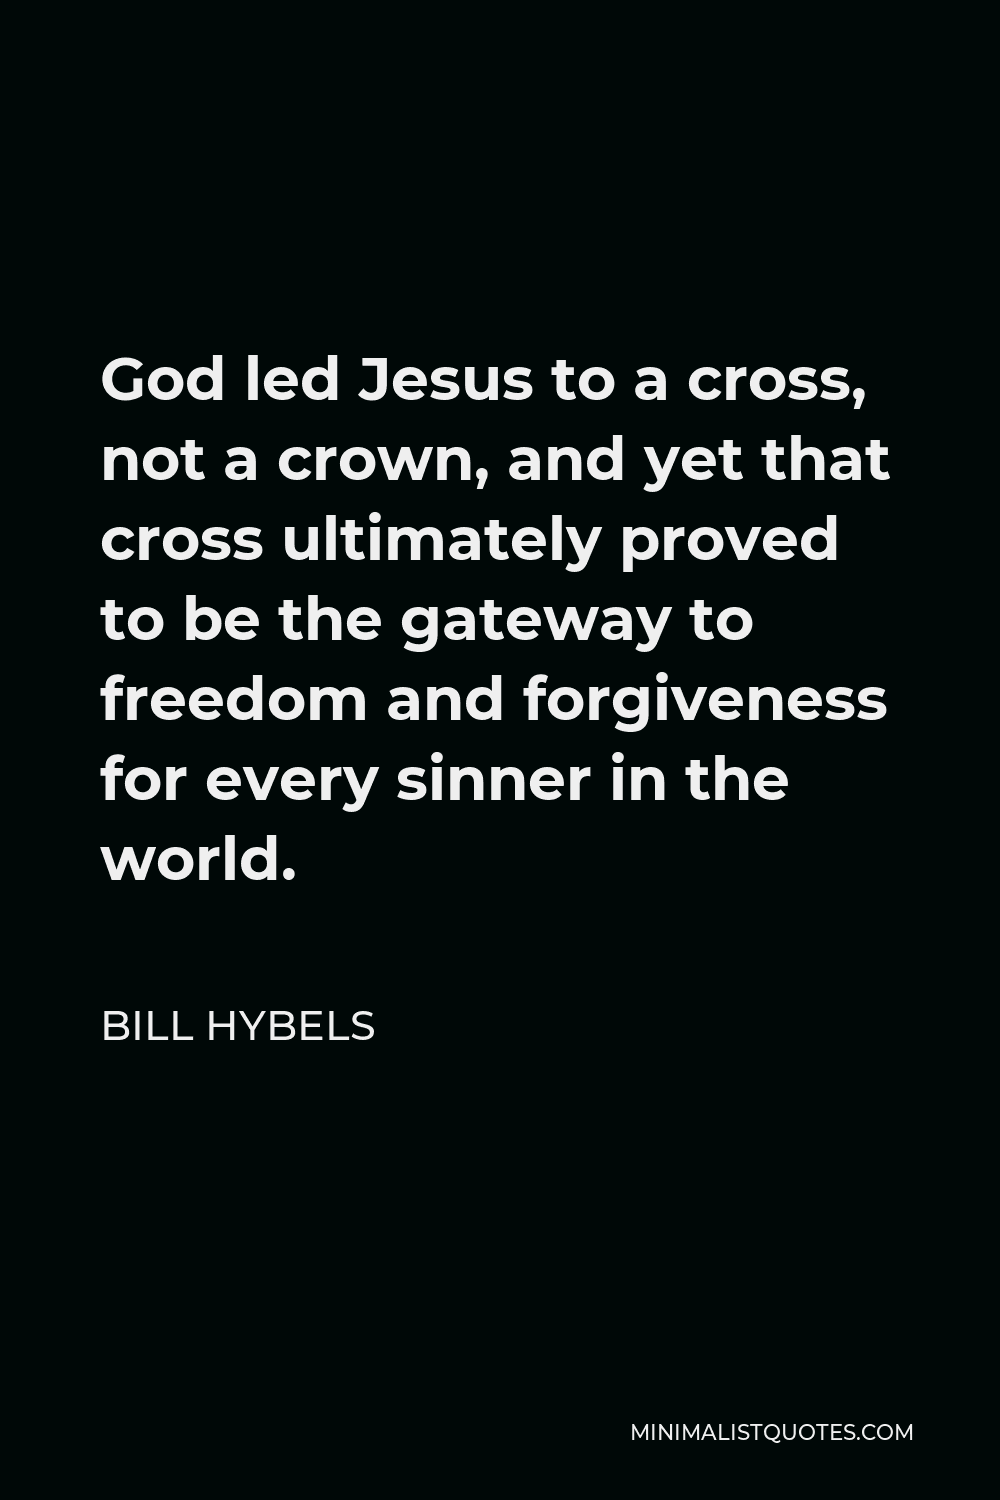 Bill Hybels Quote - God led Jesus to a cross, not a crown, and yet that cross ultimately proved to be the gateway to freedom and forgiveness for every sinner in the world.